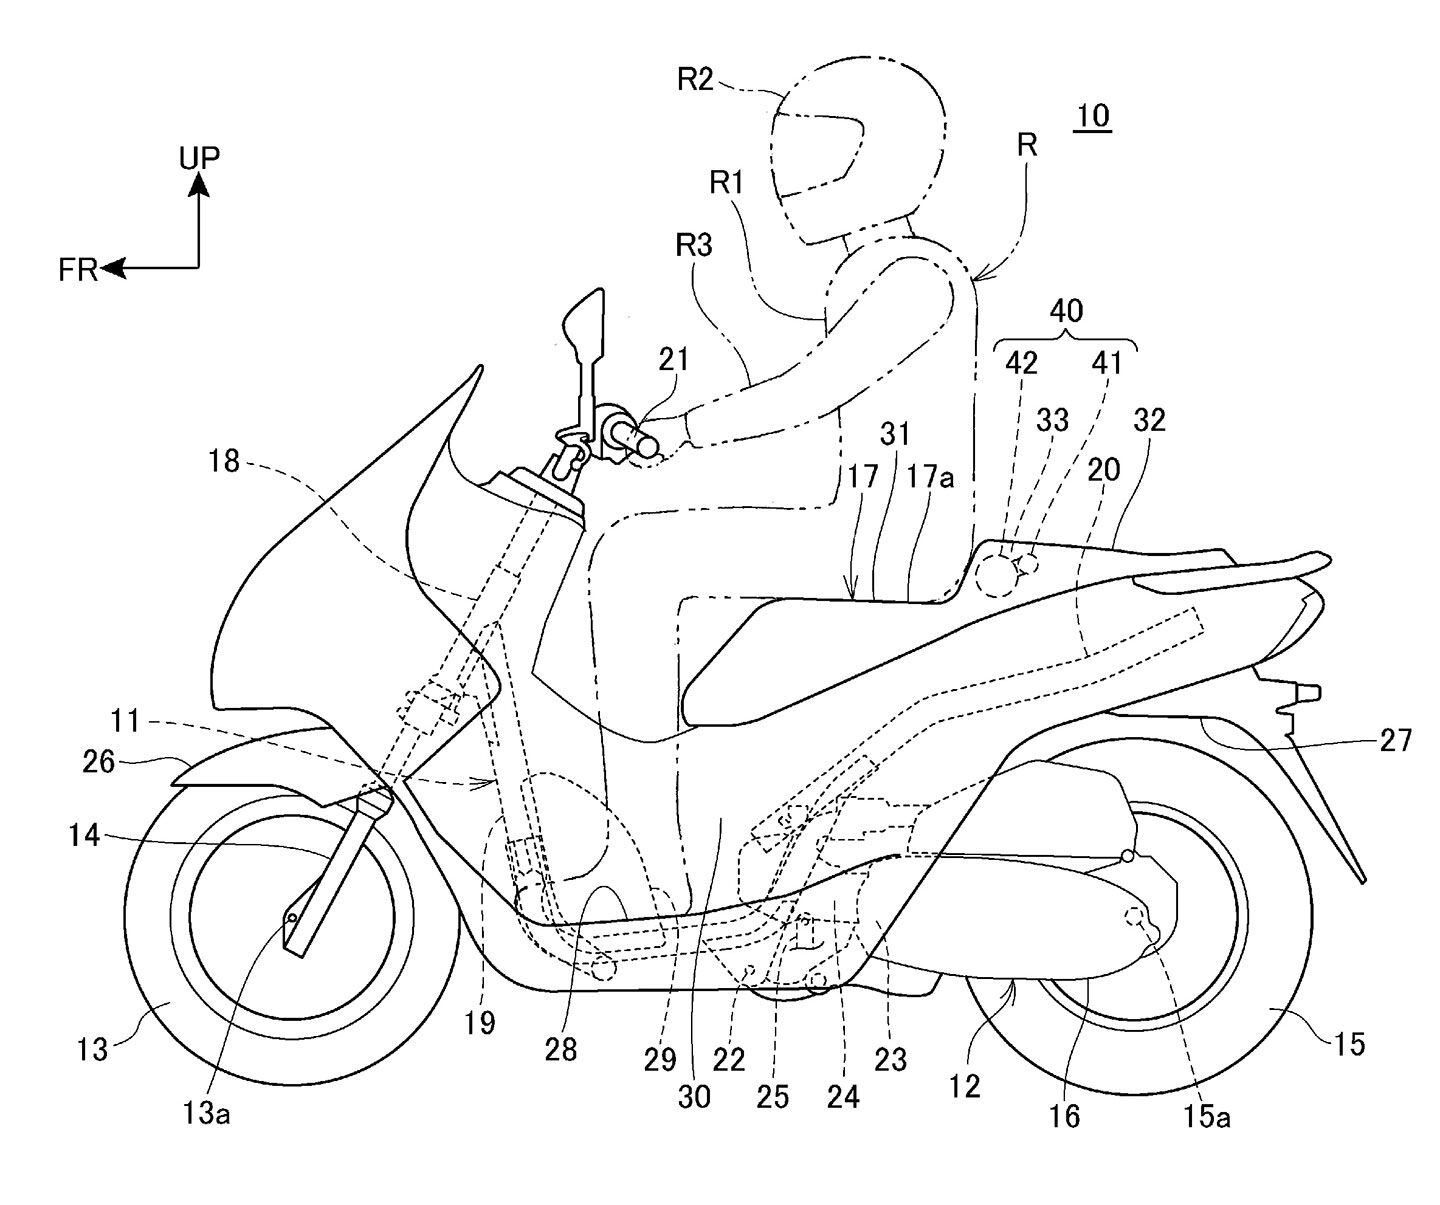 In this illustration, you can see where the airbag deploys from behind the rider.